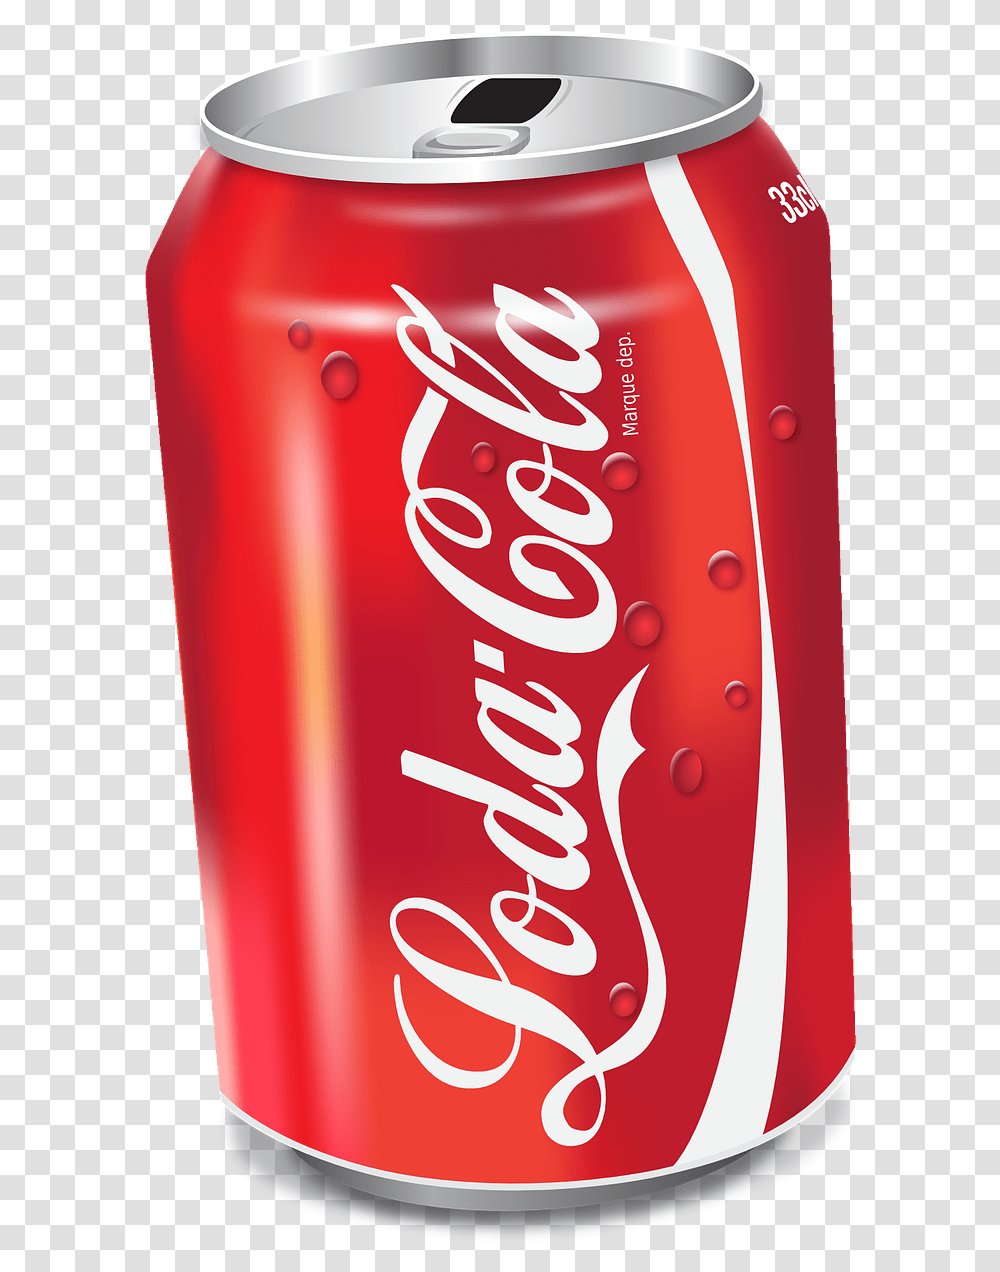 World Of Coca Cola It's The Real Deal Coca Cola, Coke, Beverage, Drink, Soda Transparent Png